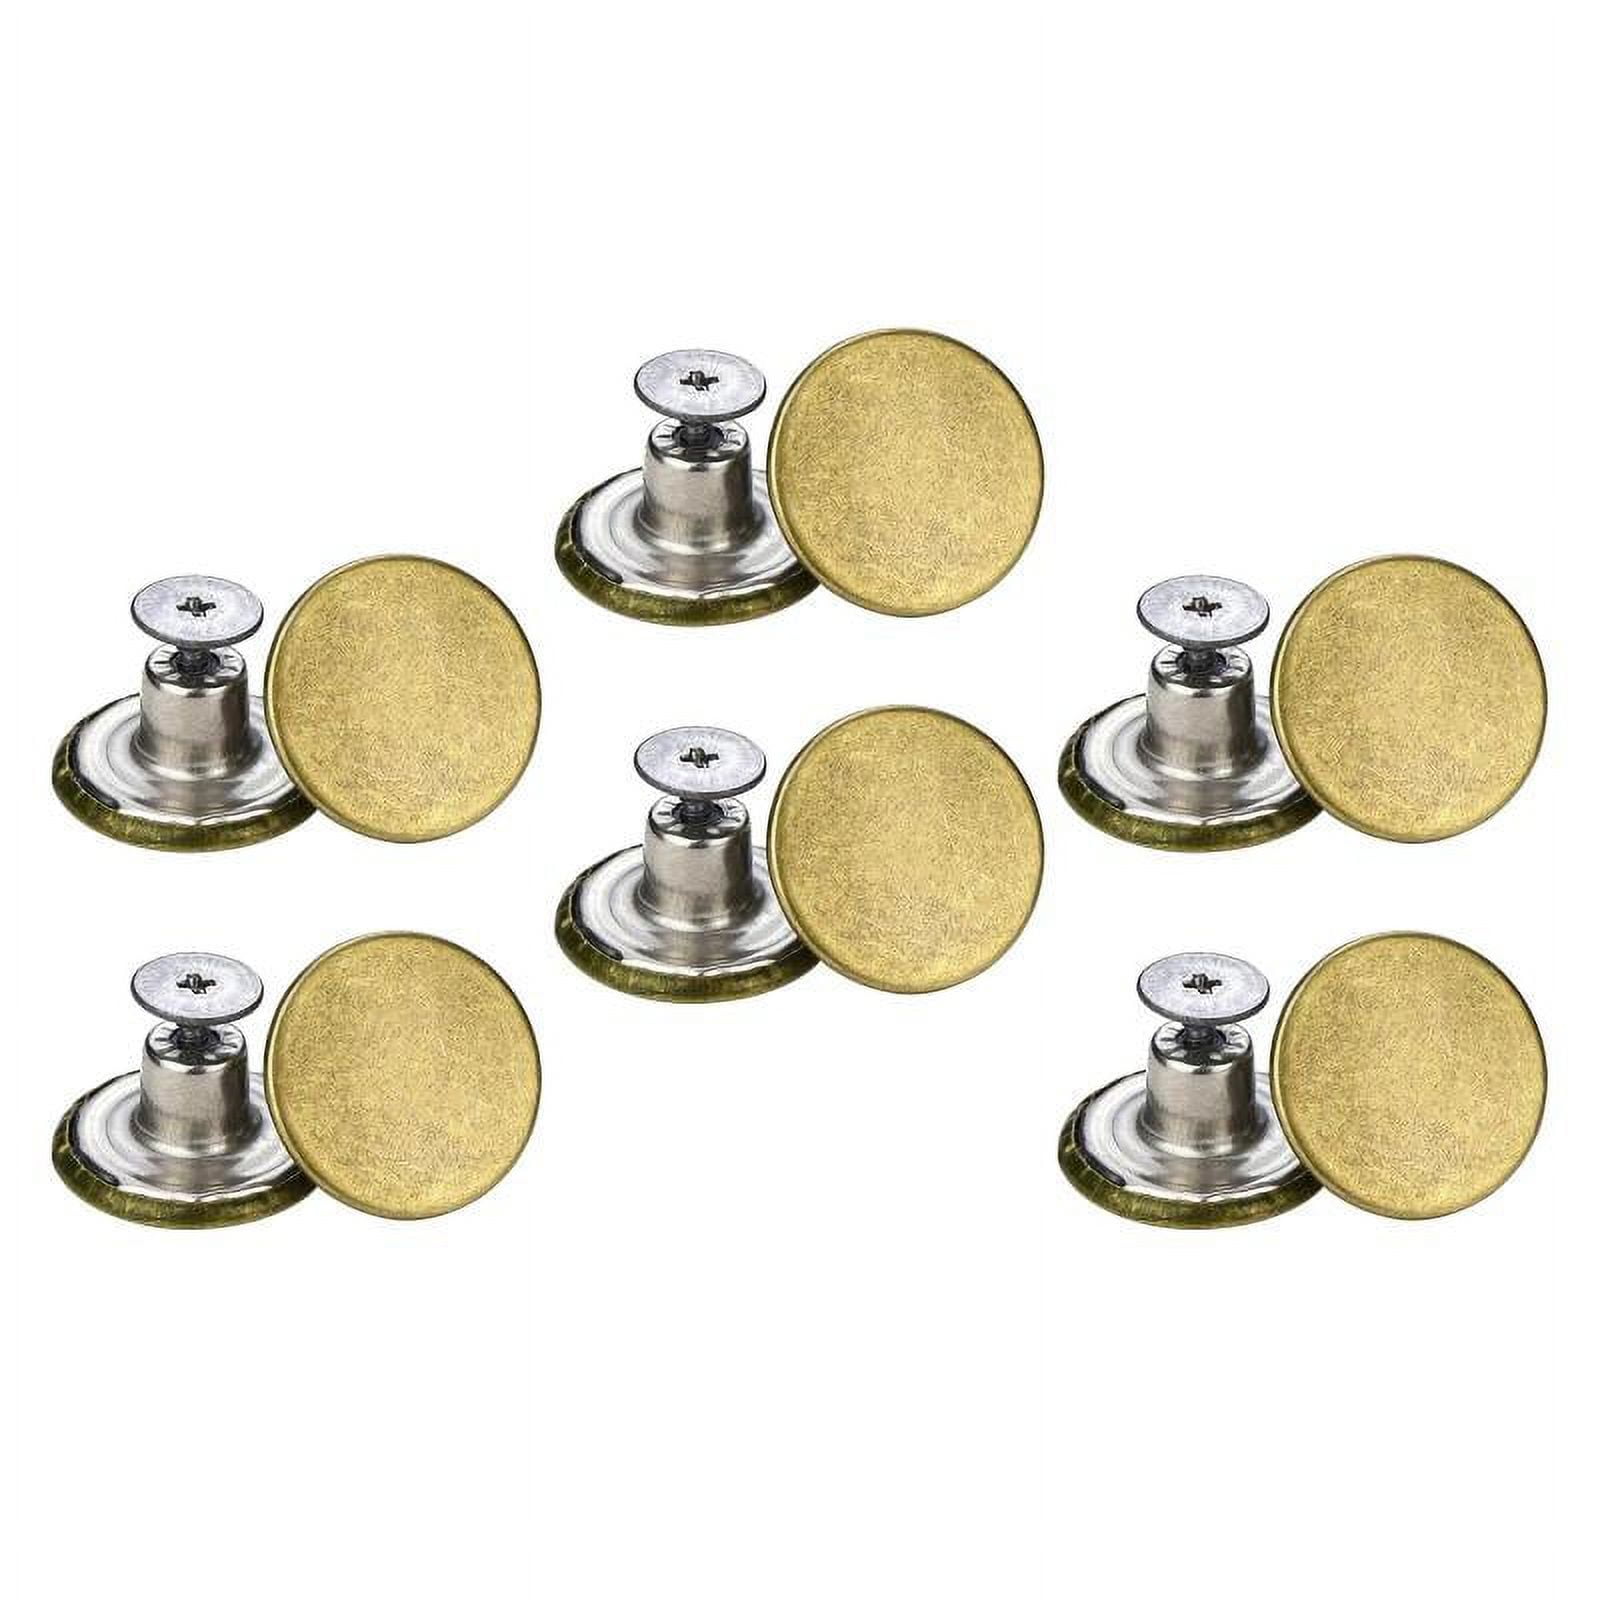 12 Pcs Buttons 17mm Metal Jean Button Replacement with Tool, No Sewing  Button Pants - Little Star, 